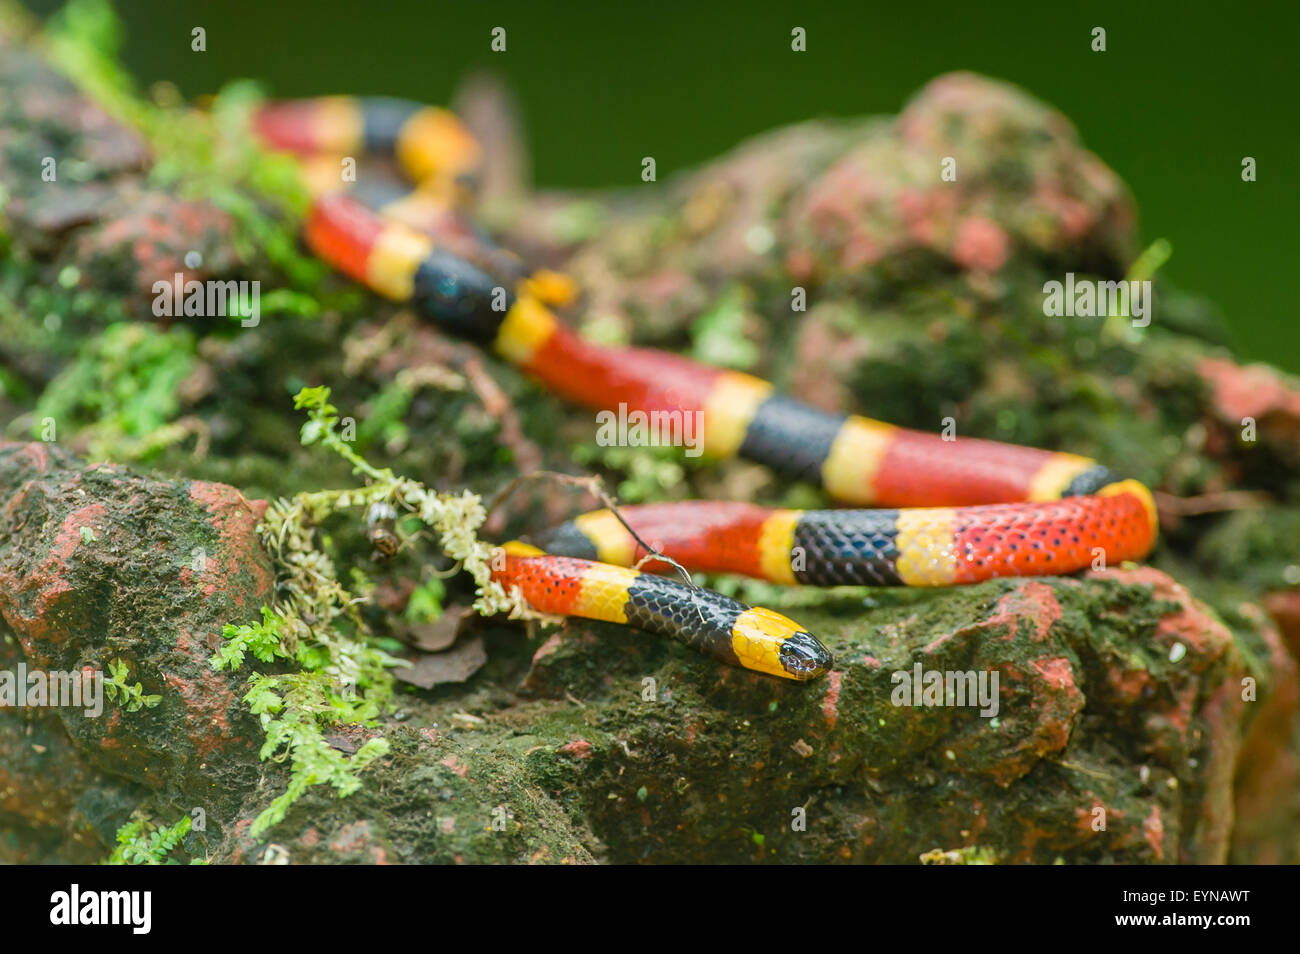 A Central American Coral snake Stock Photo